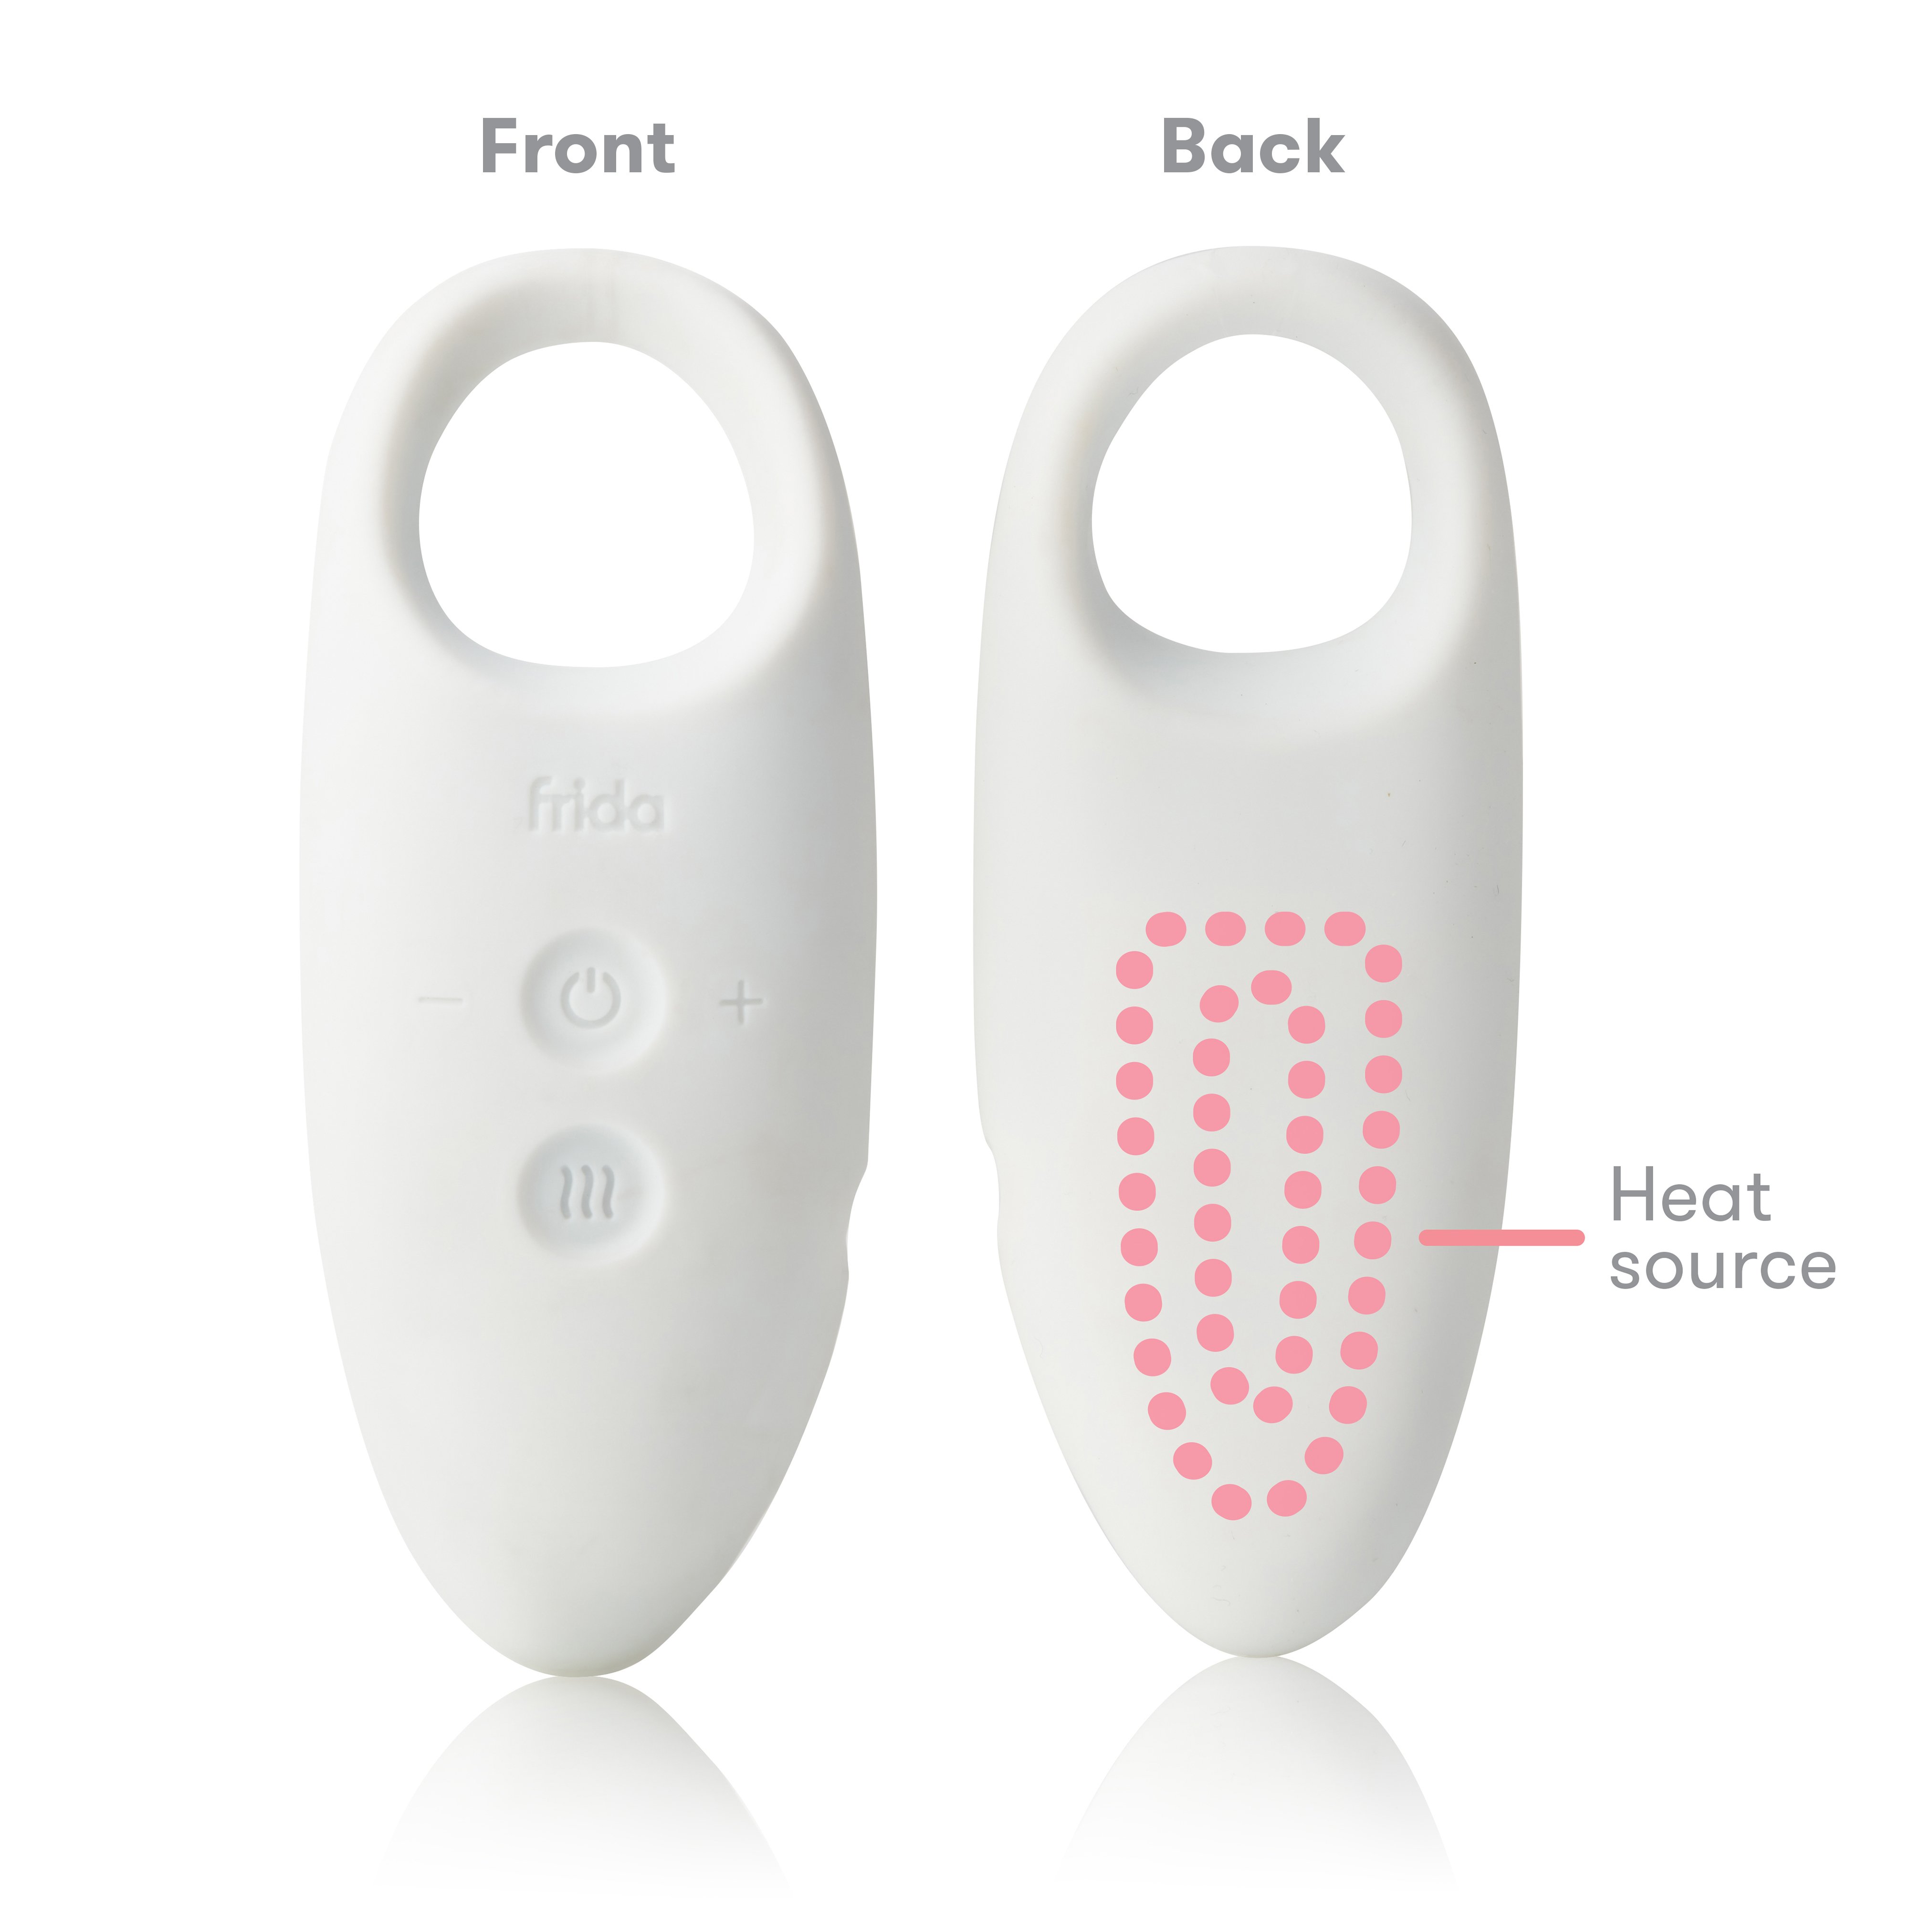 Frida Mom Breast Care Self Care Kit with 2-in-1 Lactation Massager